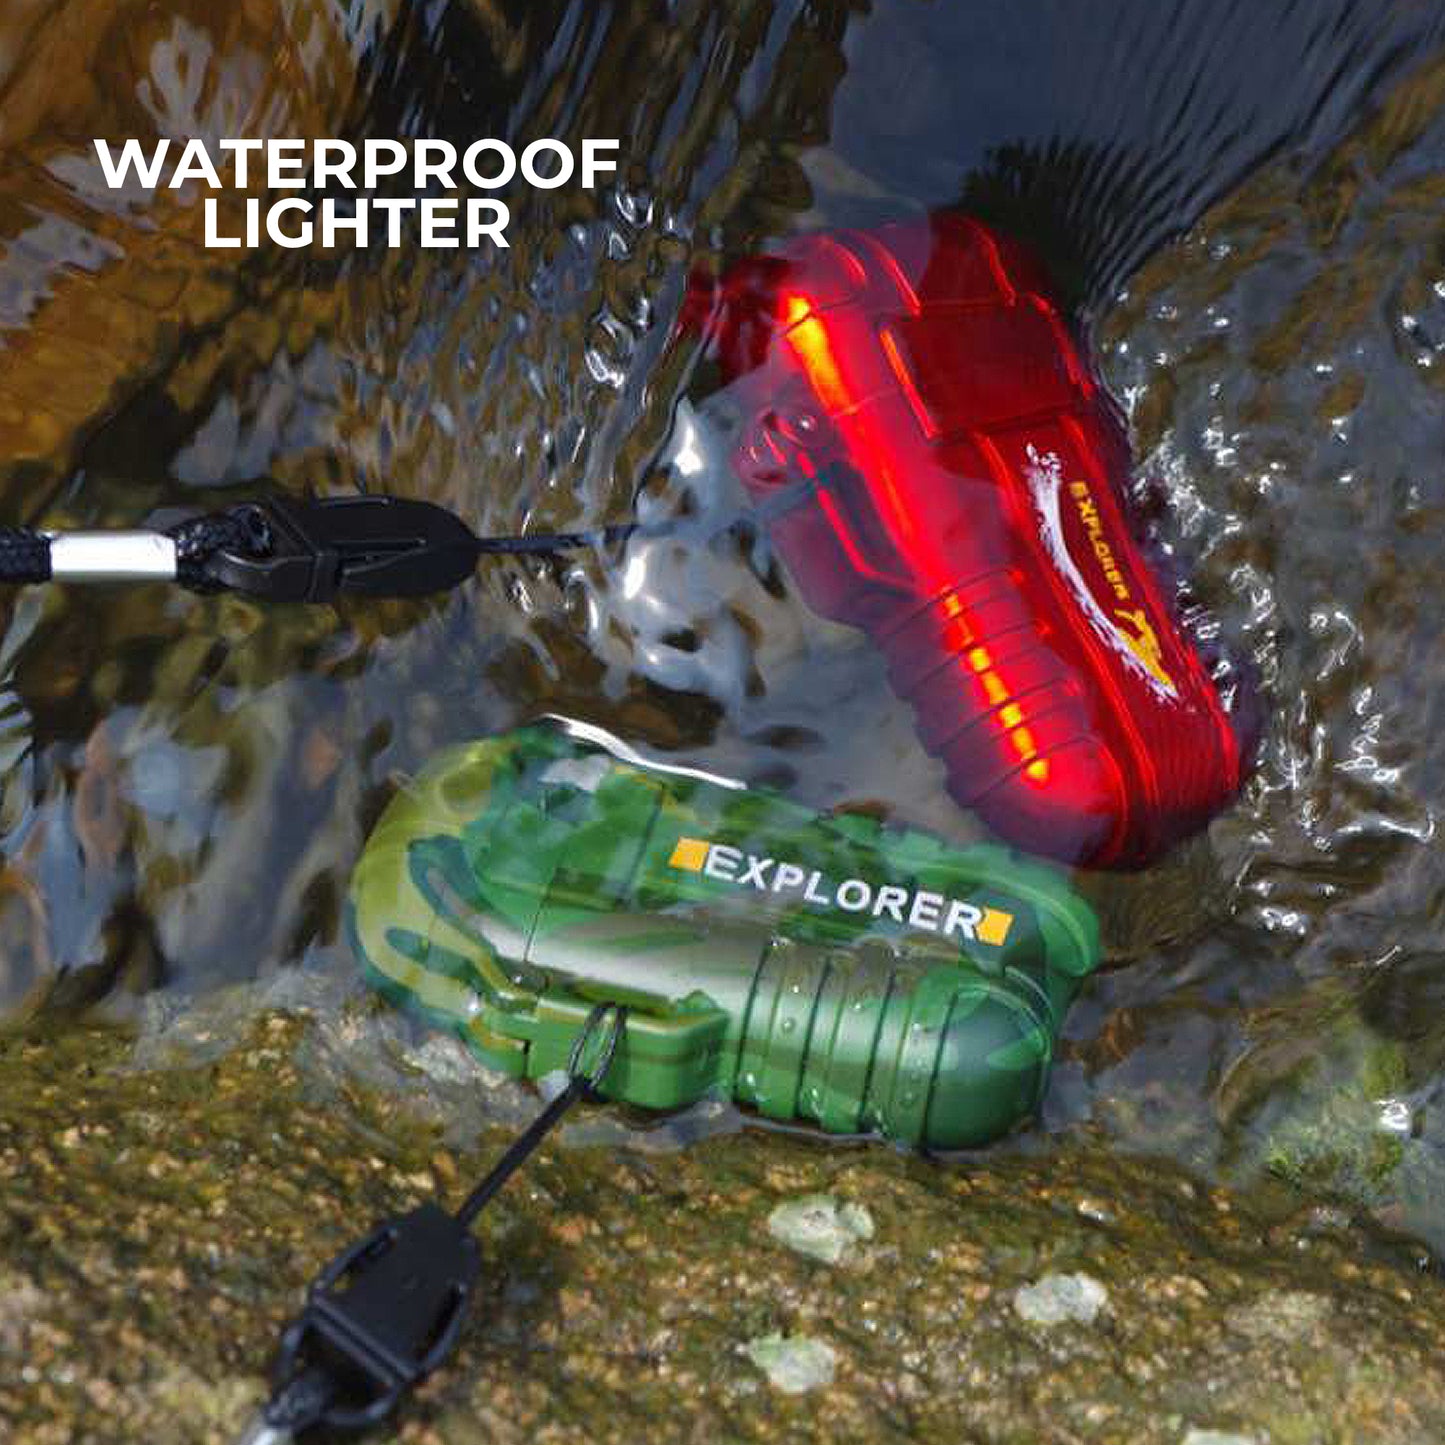 WRADER UPGRADED VERSION WATERPROOF Flameless Electric Lighter Dual Arc Plasma Beam Lighter USB Rechargeable Lighter Windproof Portable Lighter No Butane Ideal Cigarette Lighter for Camping Hiking Travelling and Indoor Outdoor Activities (Military Green)